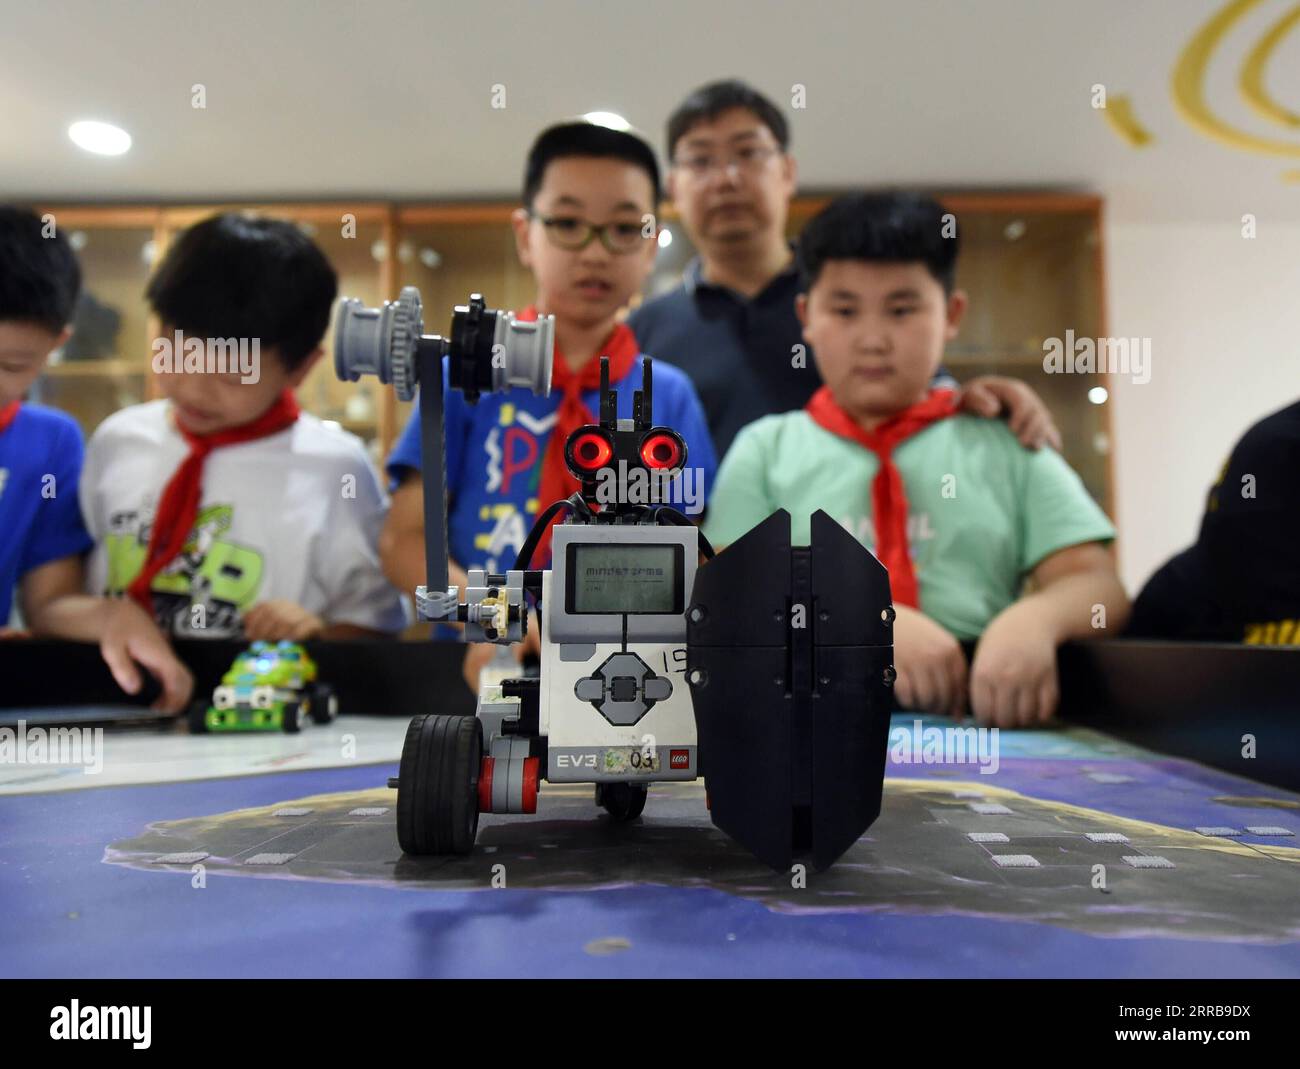 210909 -- HEFEI, Sept. 9, 2021 -- Yang Sen R2 instructs his students at the robot club at Heping Primary School in Hefei City, east China s Anhui Province, Sept. 8, 2021. Yang Sen, a computer teacher from Heping Primary School, has interest in graphical language applied to robots in his spare time. After class, he organizes a robot club instructing his students to explore the use of multiple sensors and various scientific principles.  CHINA-ANHUI-HEFEI-AFTER-SCHOOL ACTIVITY CN ZhouxMu PUBLICATIONxNOTxINxCHN Stock Photo